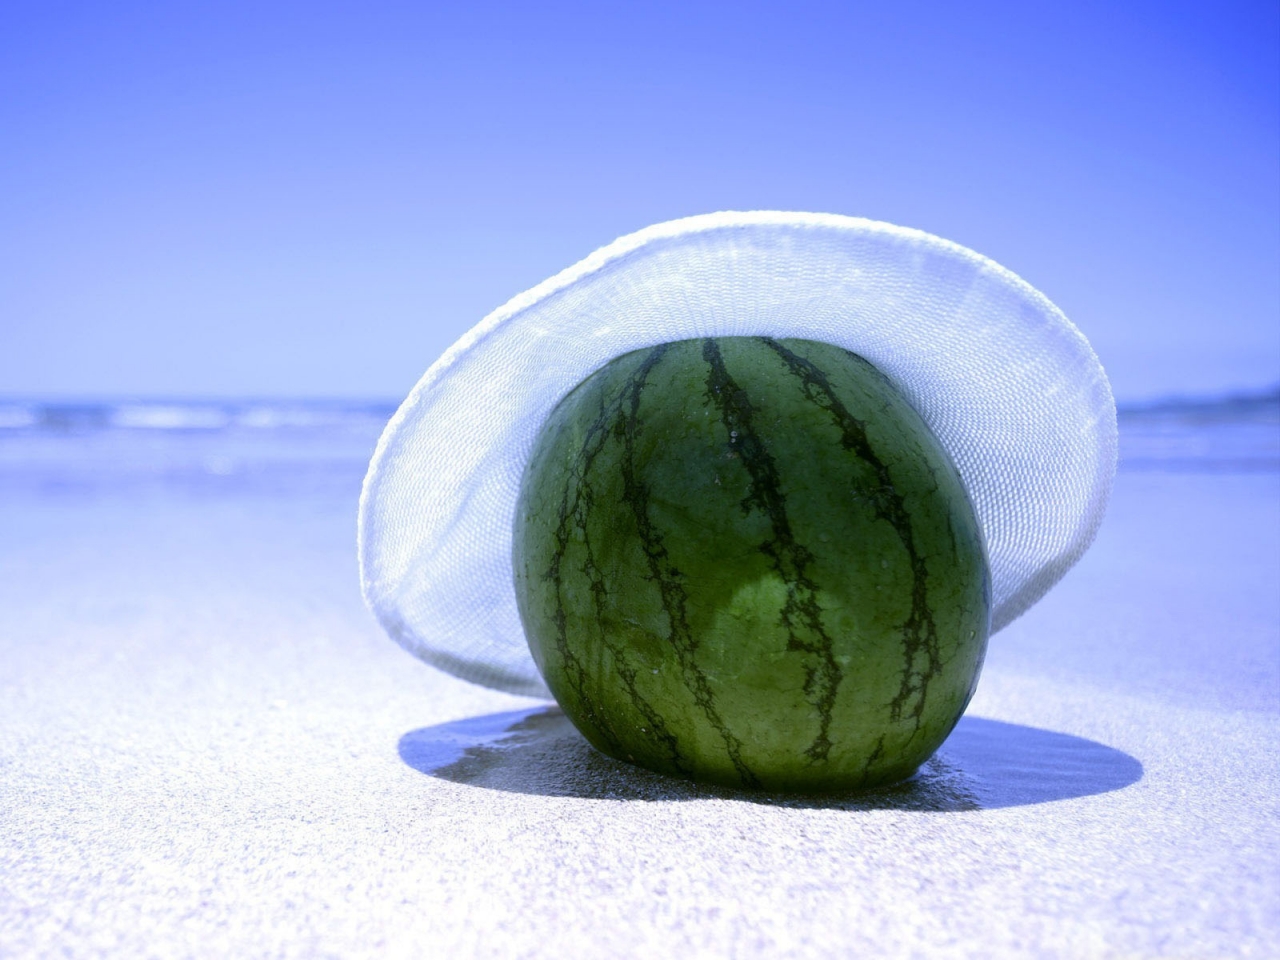 Watermelon on the beach for 1280 x 960 resolution